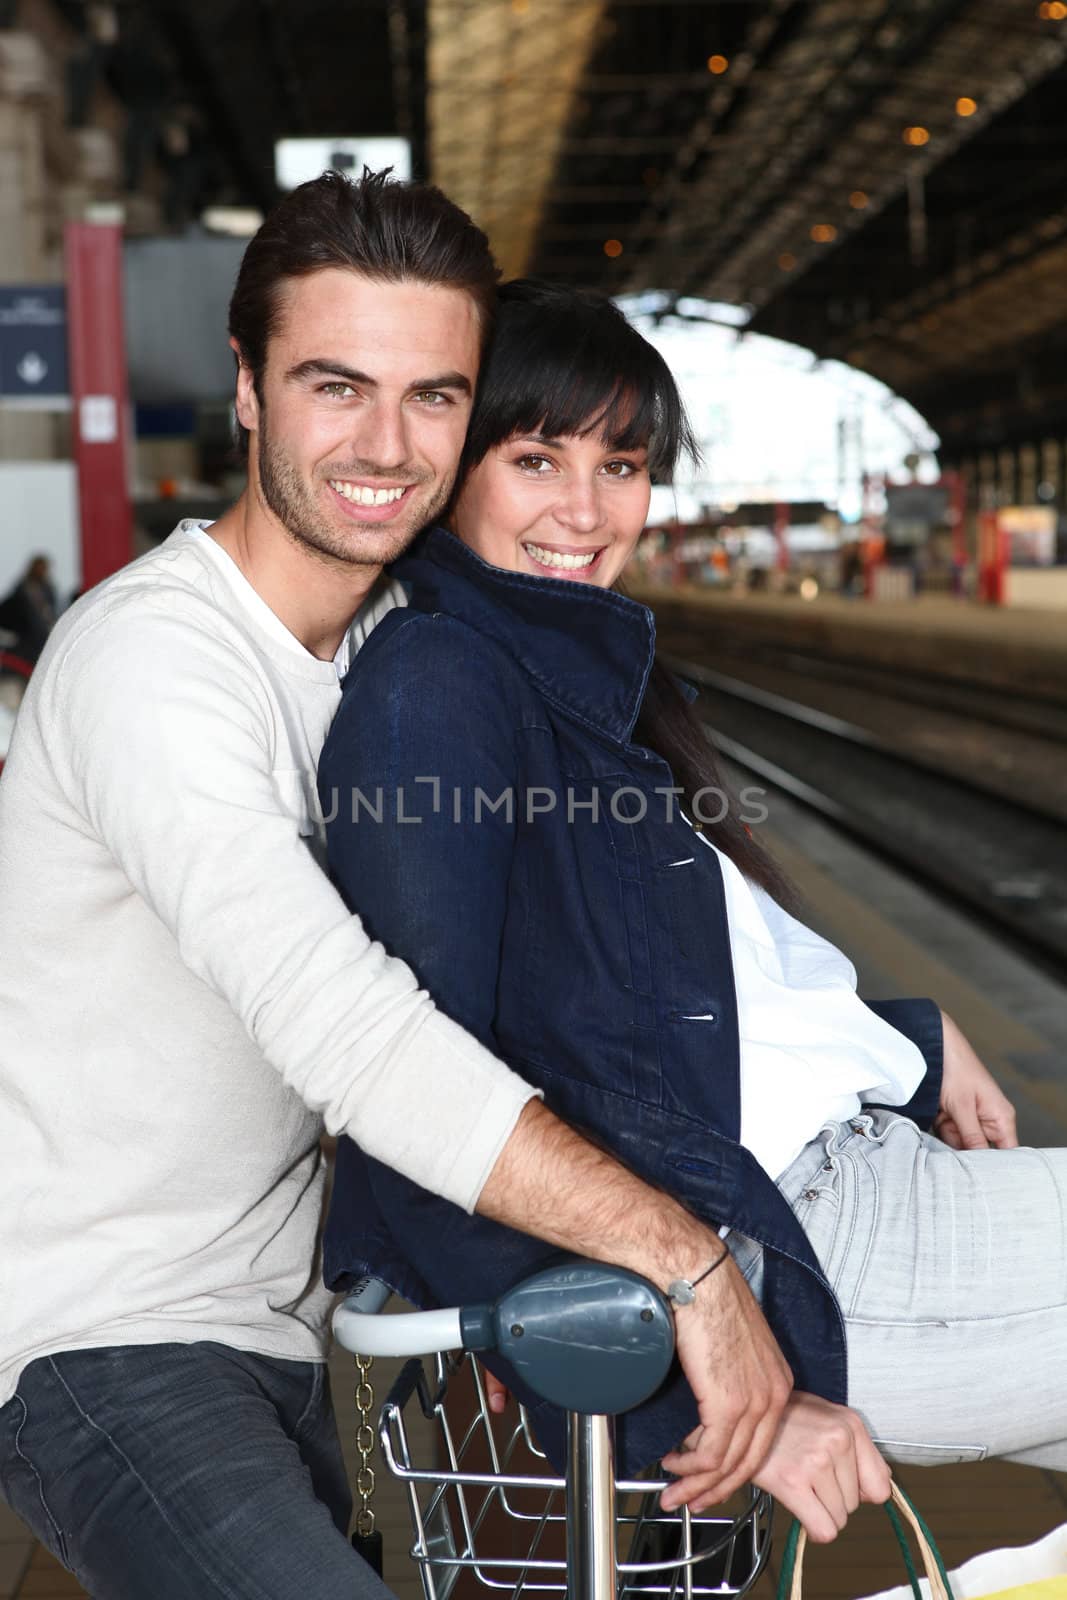 Couple waiting for the train